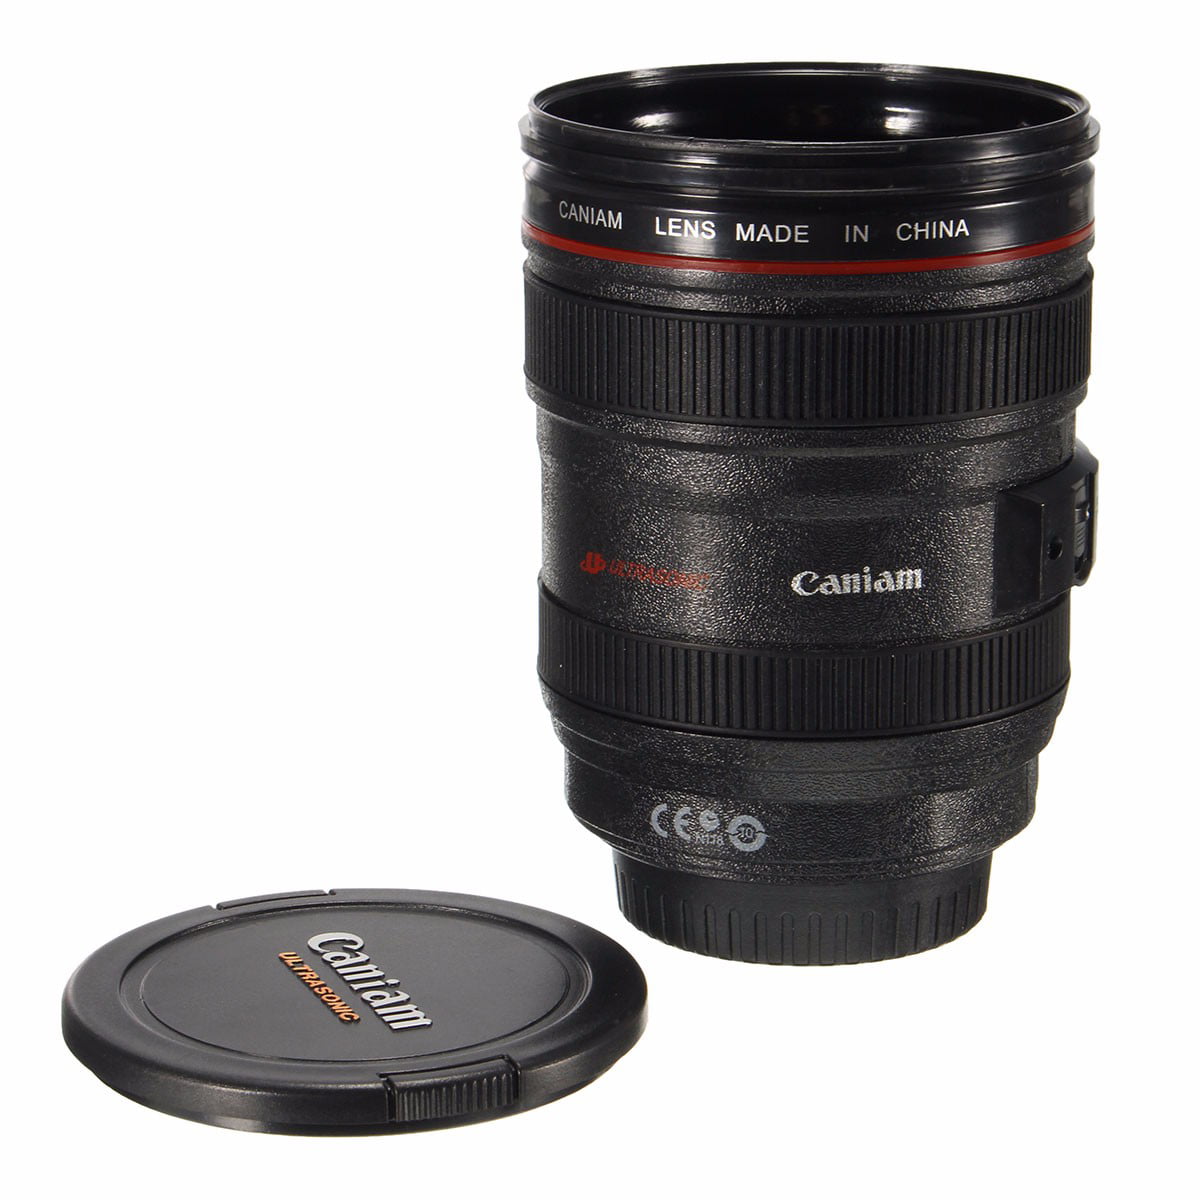 lens thermos